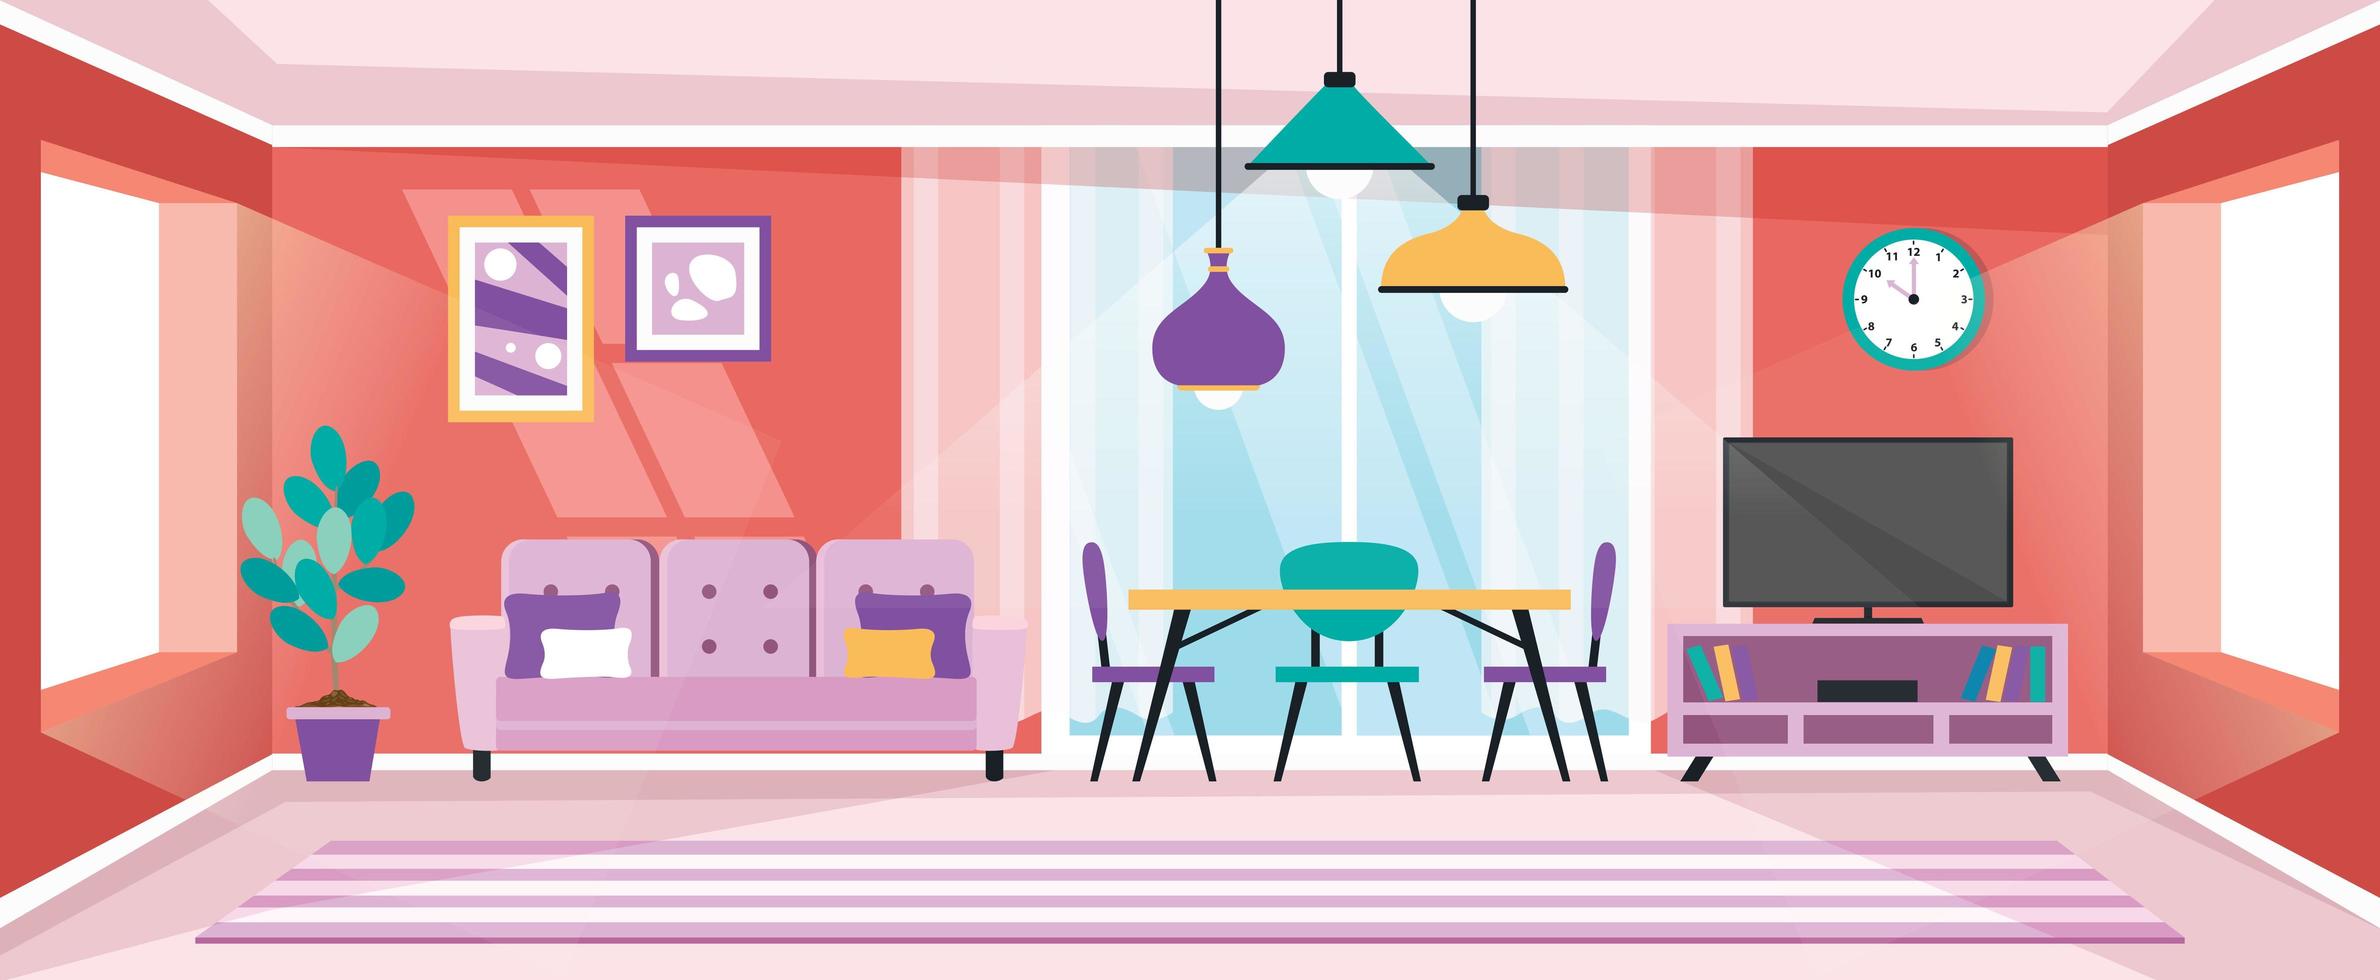 Interior Design Concept With Flat Furnitures vector